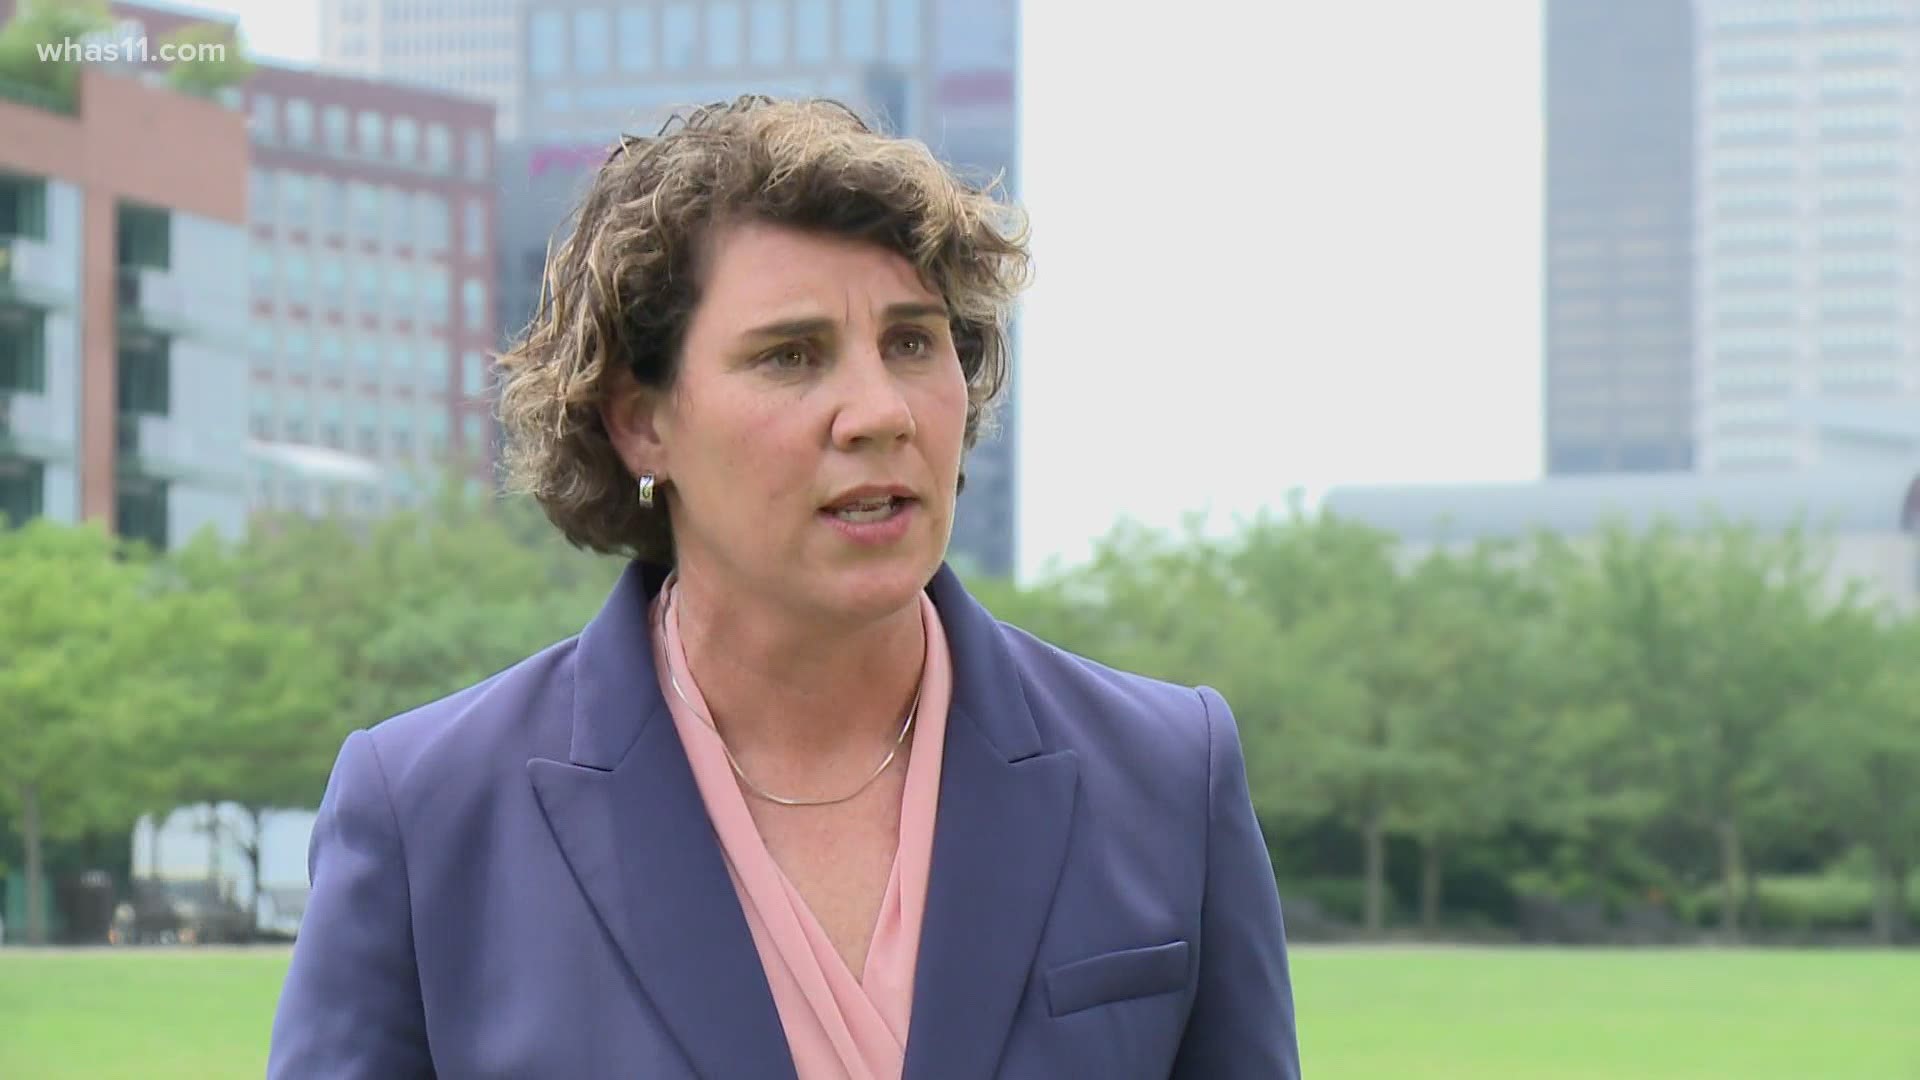 For the first time since her close Kentucky Primary victory, Amy McGrath is talking about the upcoming Senate race.